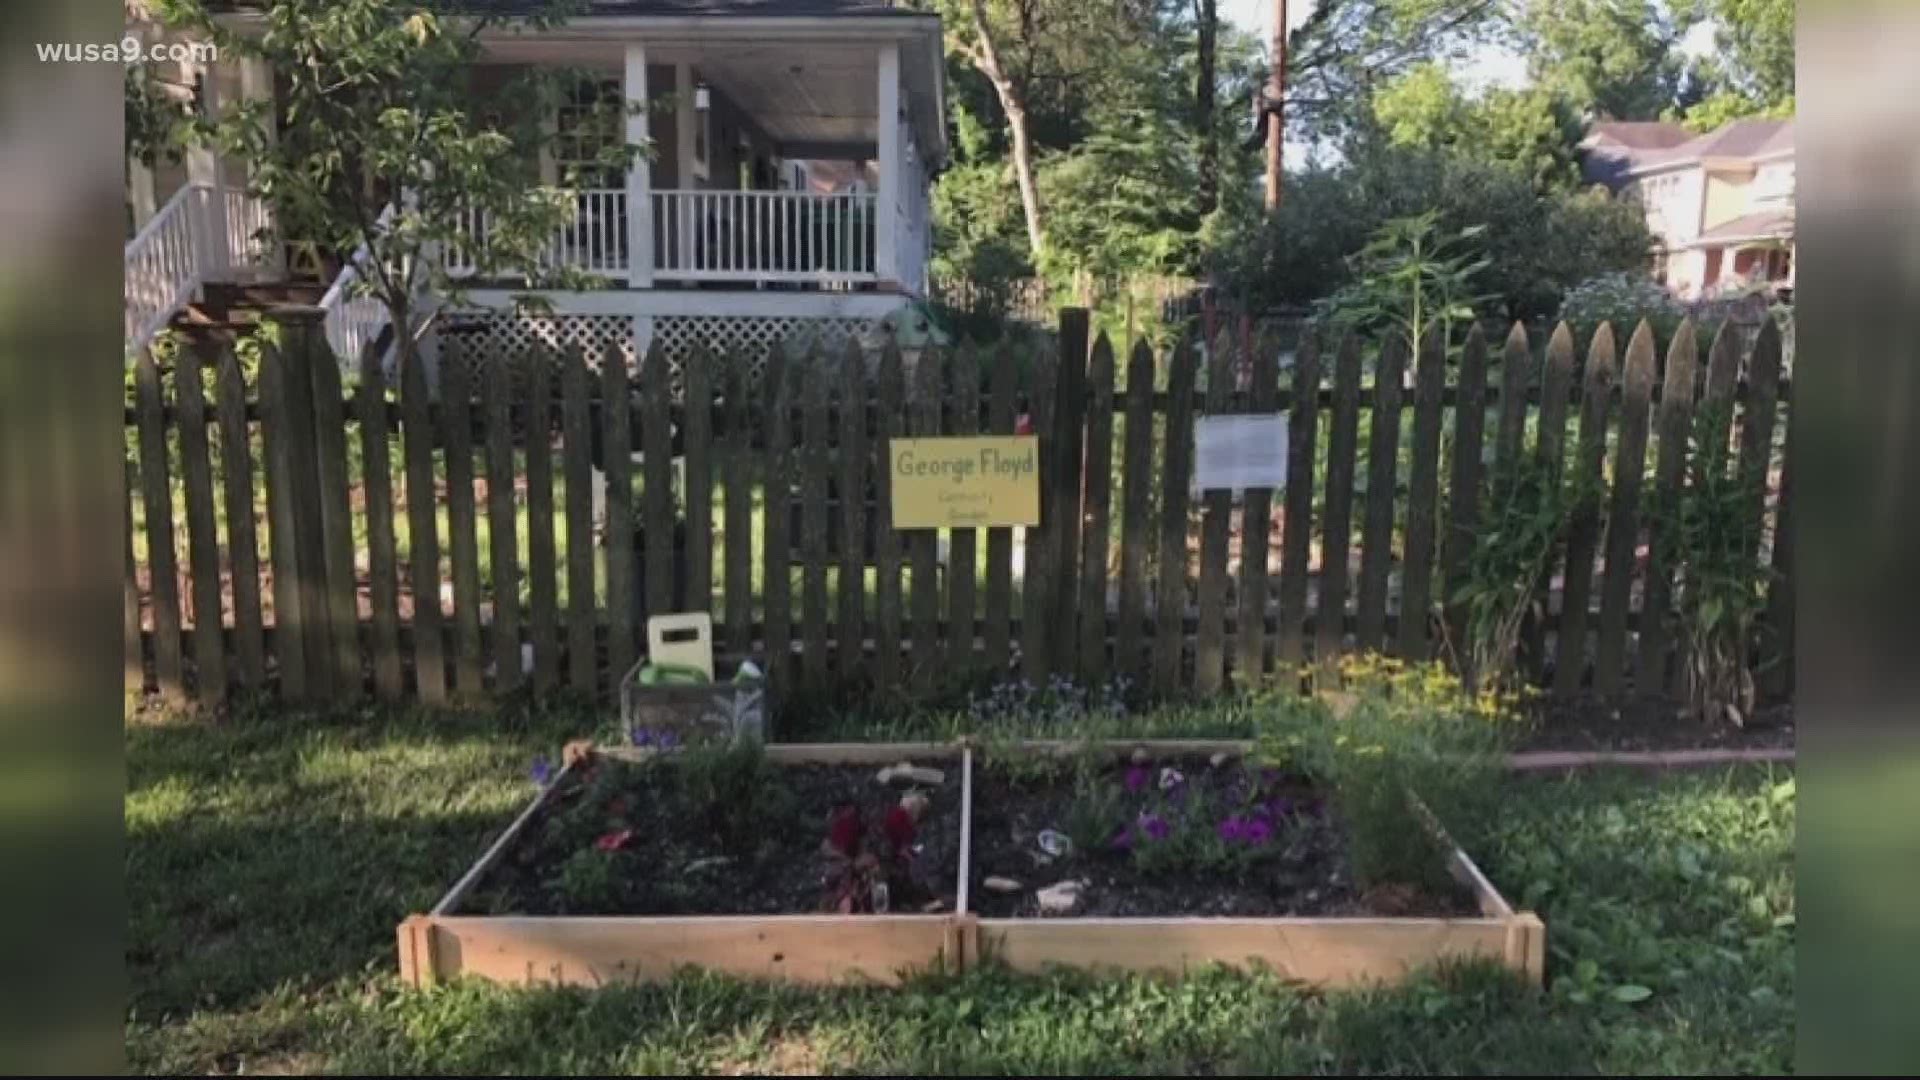 The owner of the garden is inviting others to plant their favorite flower to honor George Floyd.